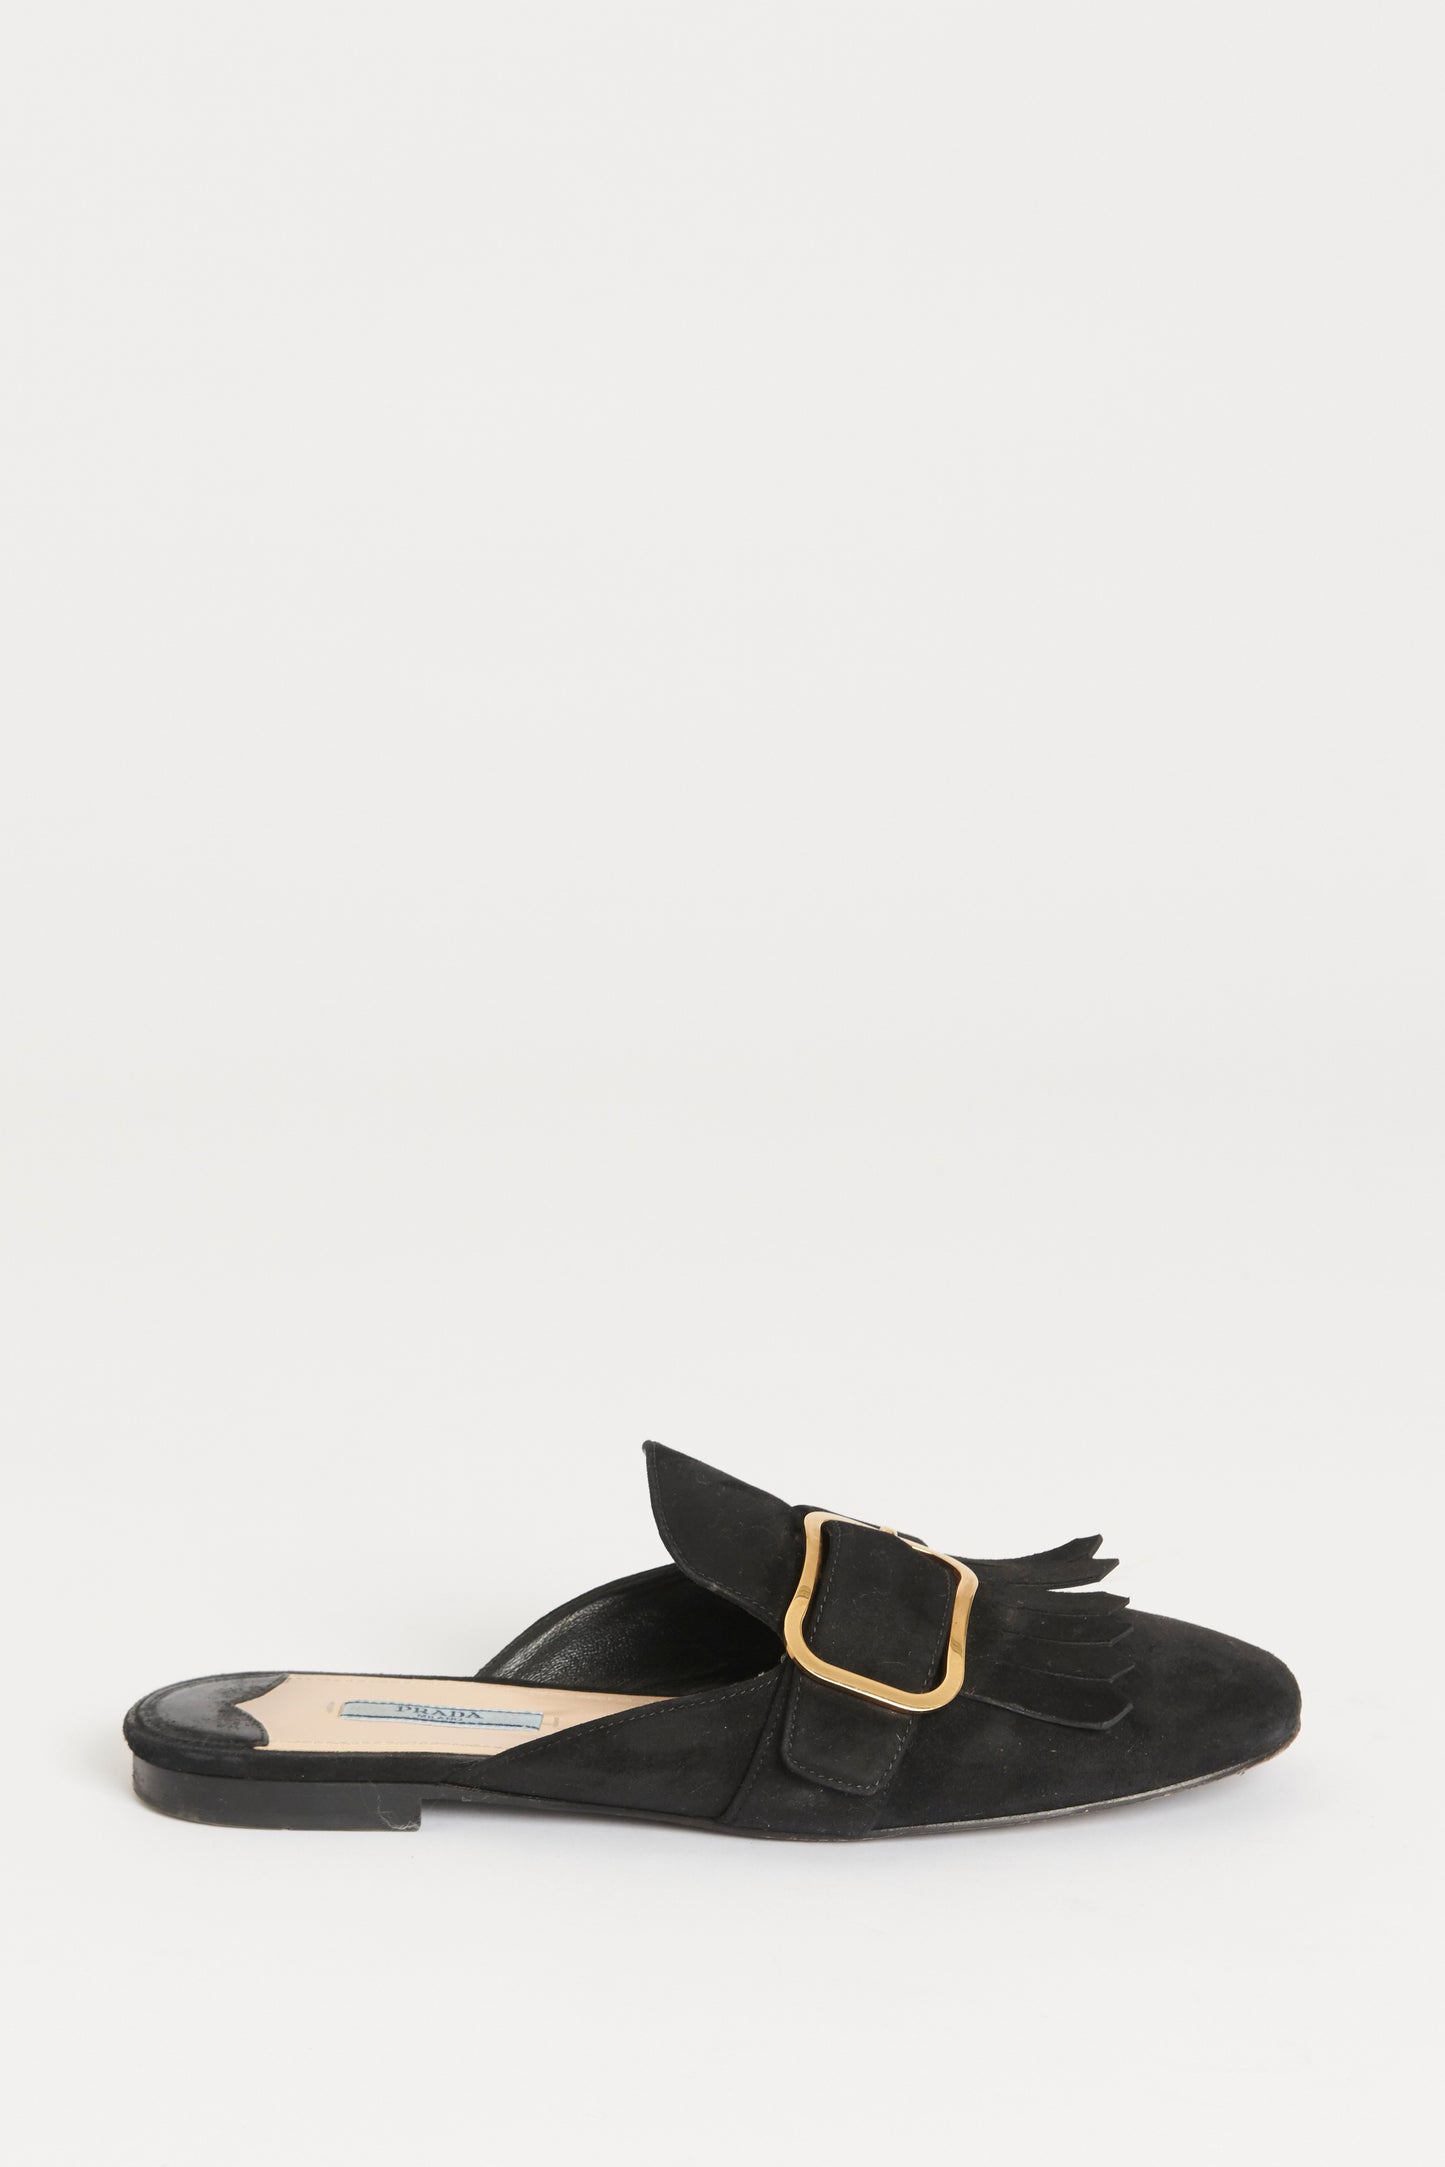 Black Suede Kiltie Preowned Fringed Loafer Mules